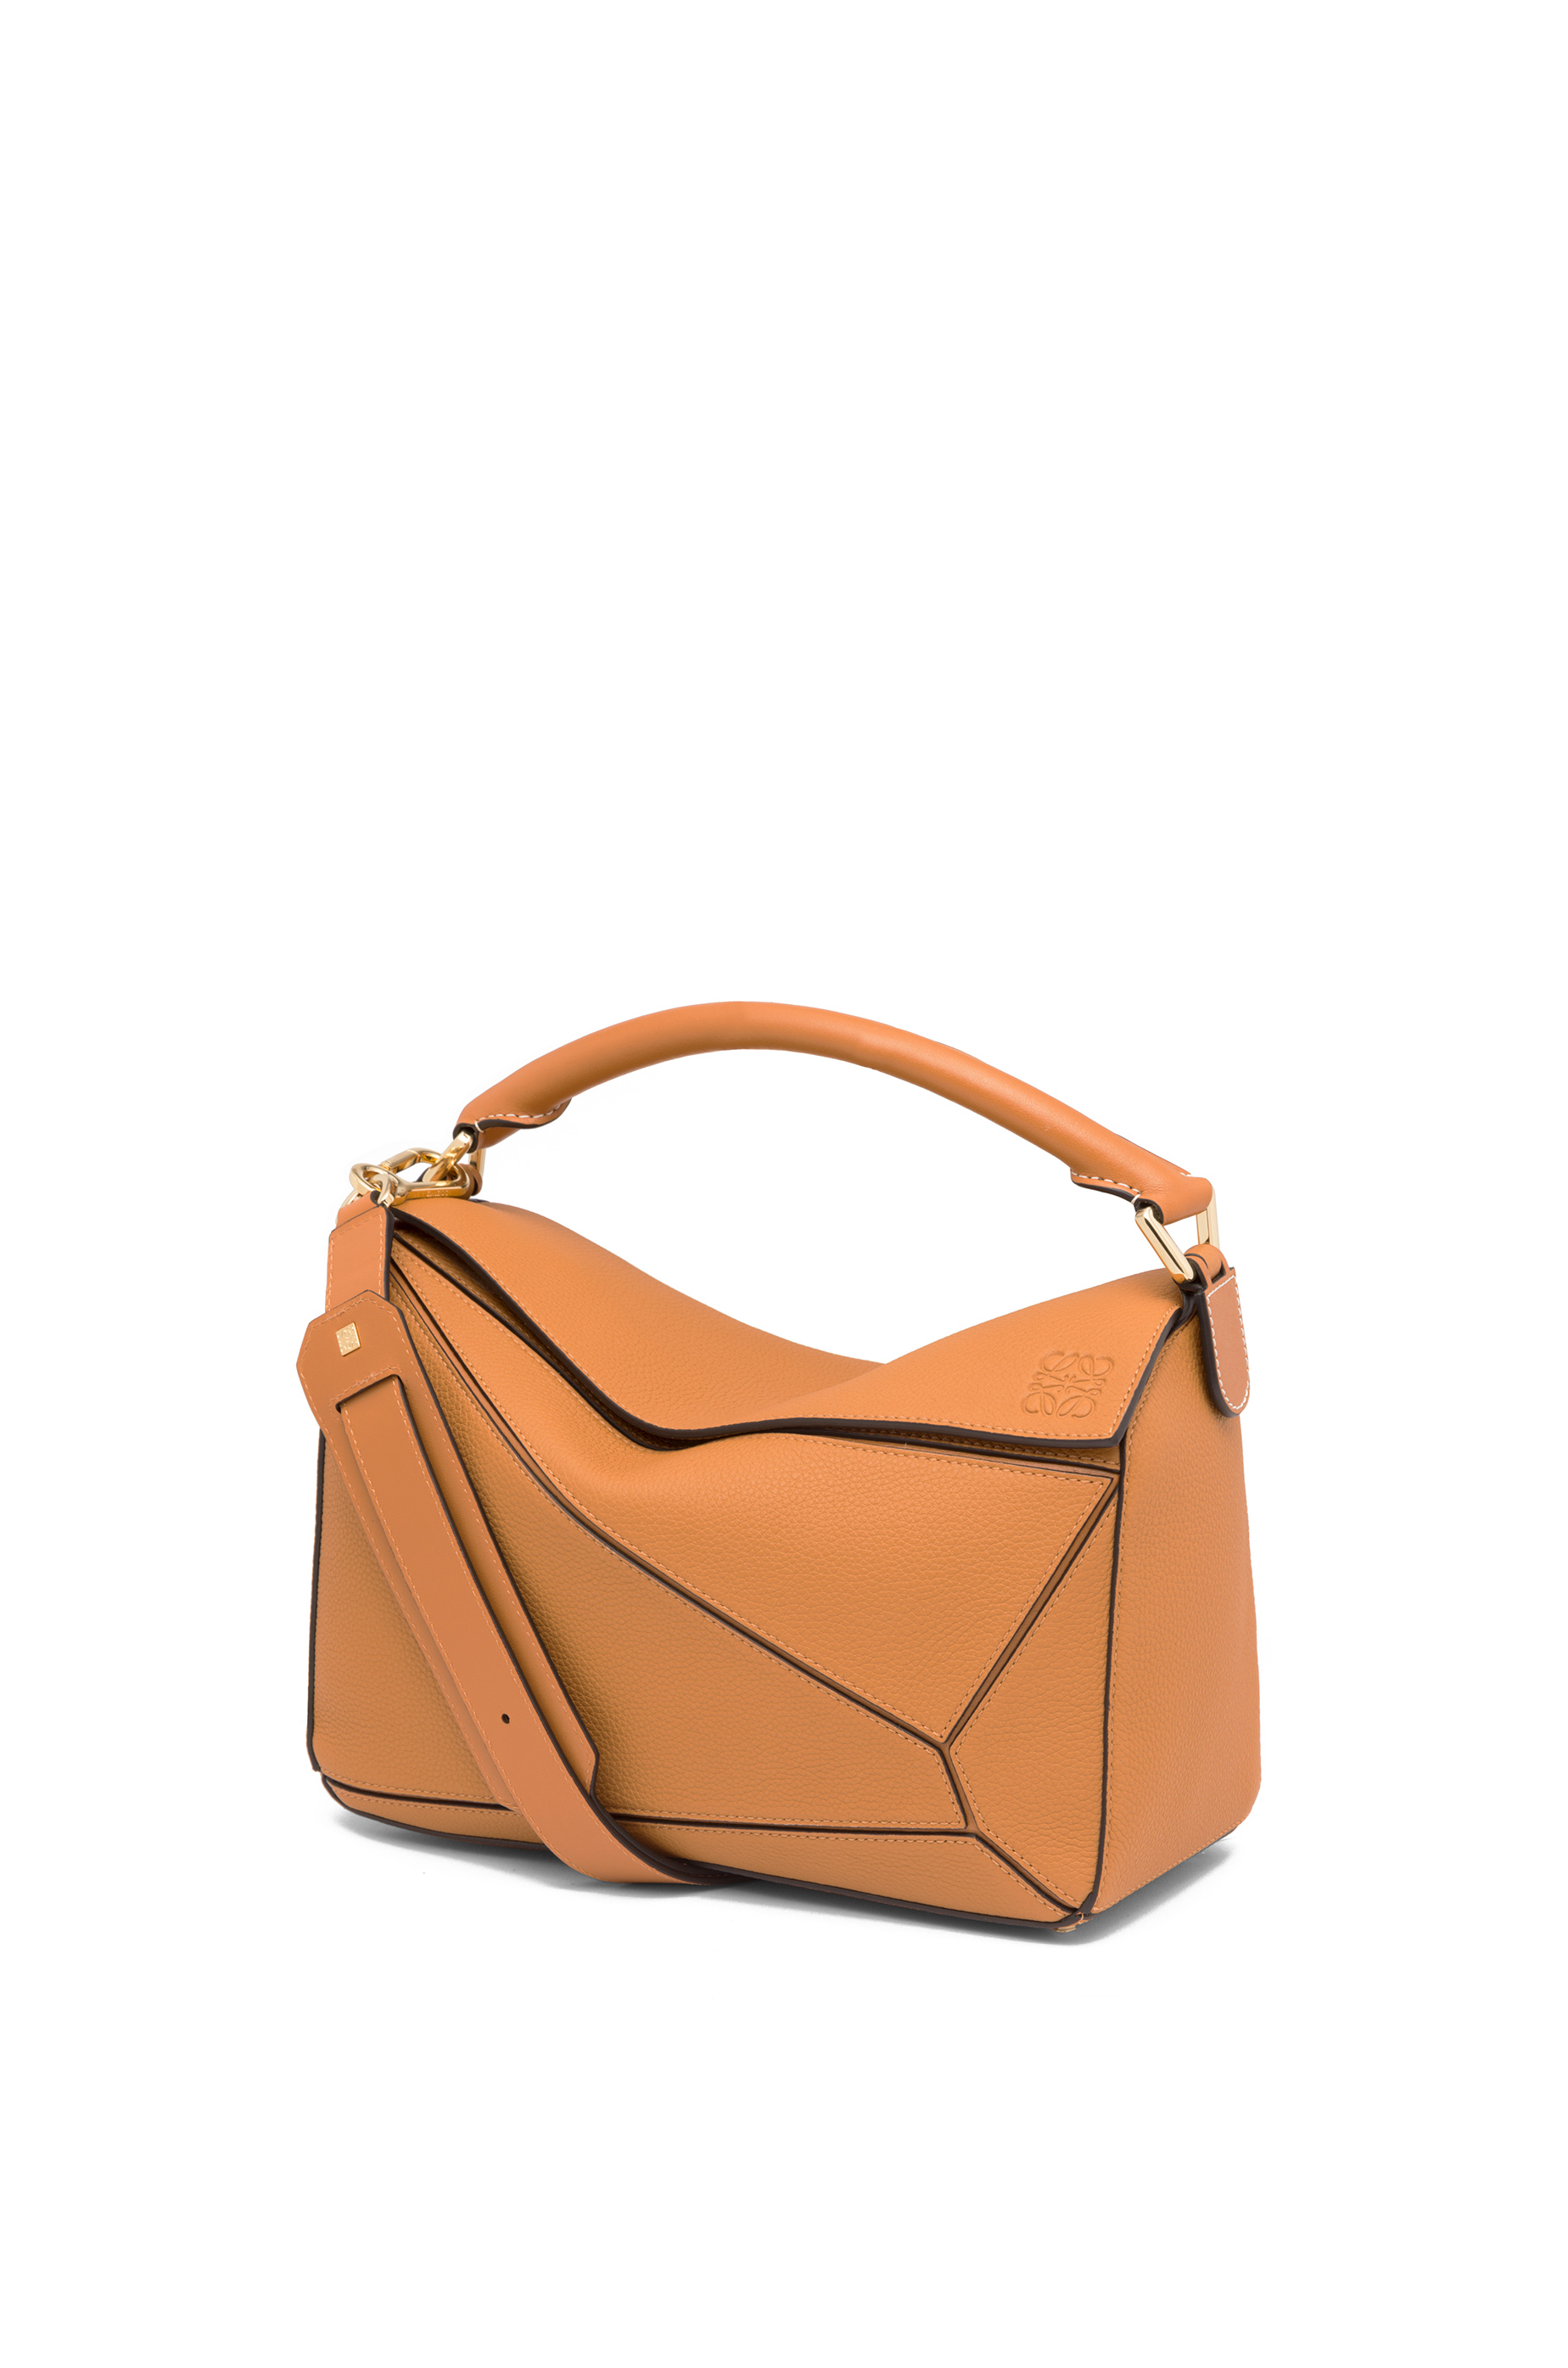 loewe bag from which country